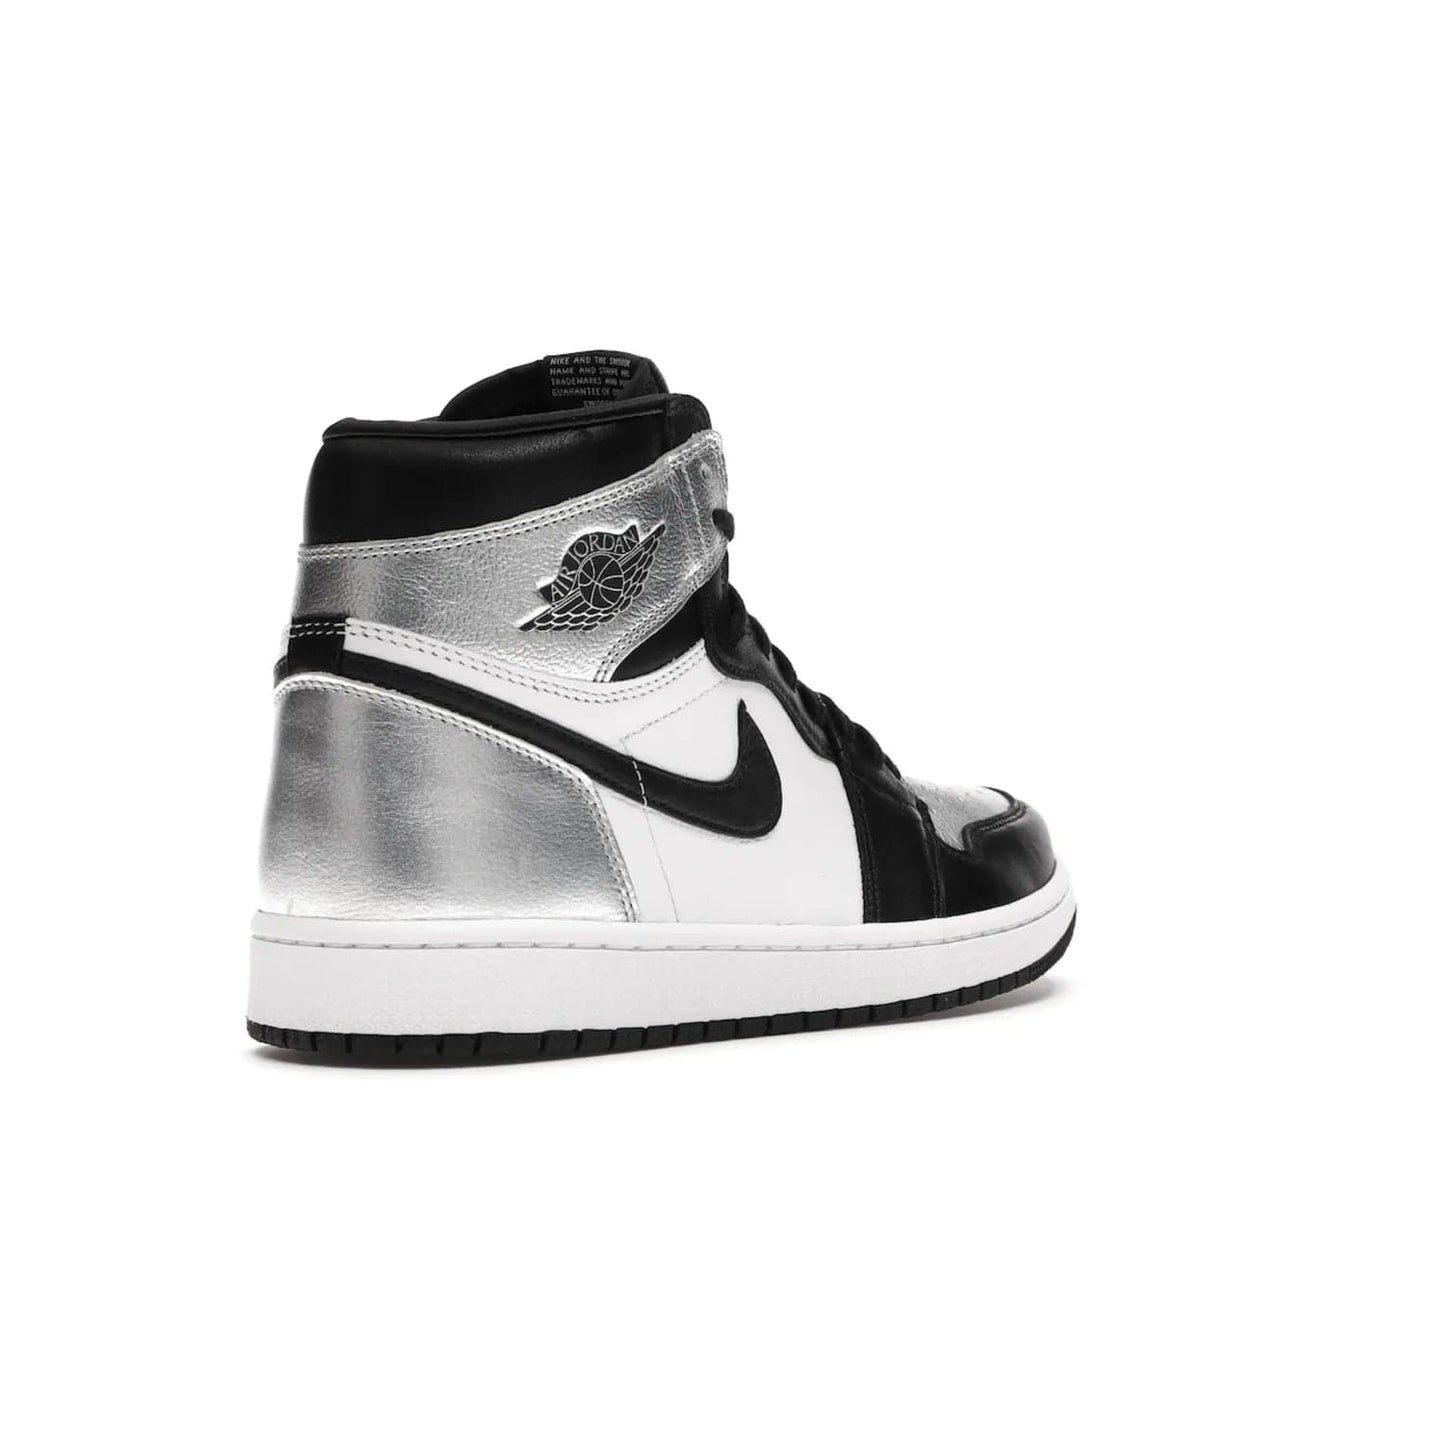 Jordan 1 Retro High Silver Toe (Women's) - Image 32 - Only at www.BallersClubKickz.com - Introducing the Jordan 1 Retro High Silver Toe (Women's): an updated spin on the iconic 'Black Toe' theme. Featuring white & black leather and silver patent leather construction. Nike Air branding, Air Jordan Wings logo, and white/black sole finish give a classic look. The perfect addition to an on-trend streetwear look. Available in classic black & white, this Jordan 1 is an instant classic. Released in February 20